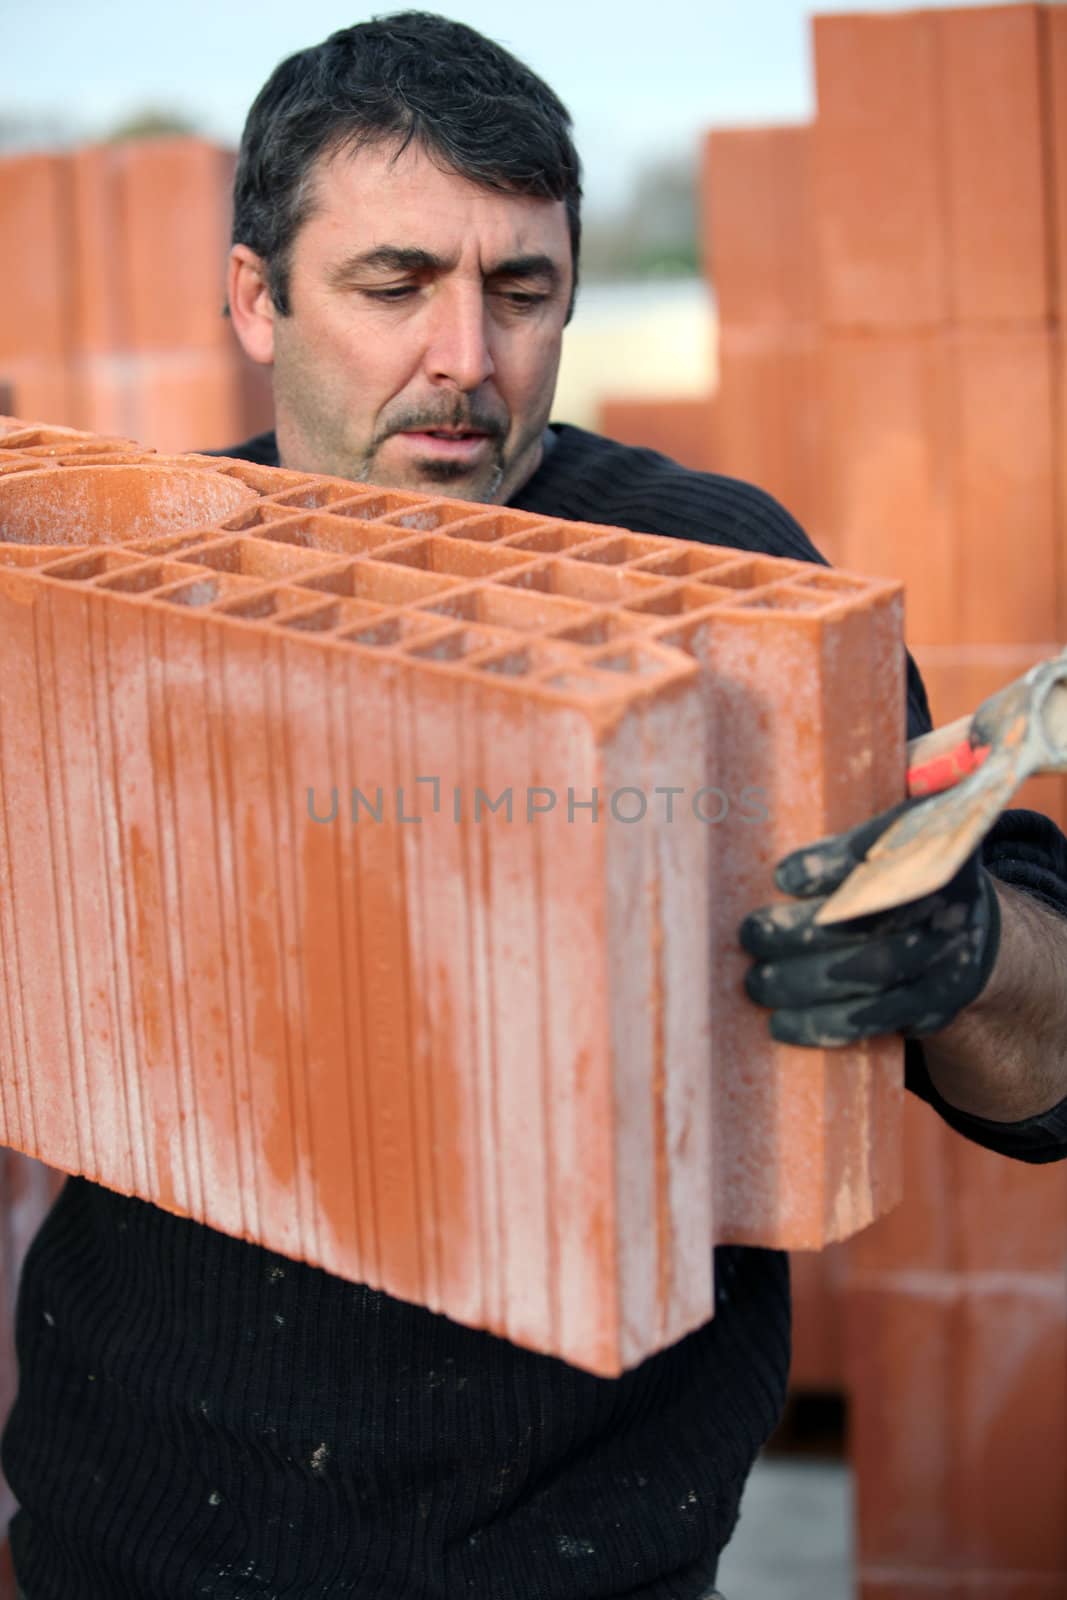 Bricklayer on site